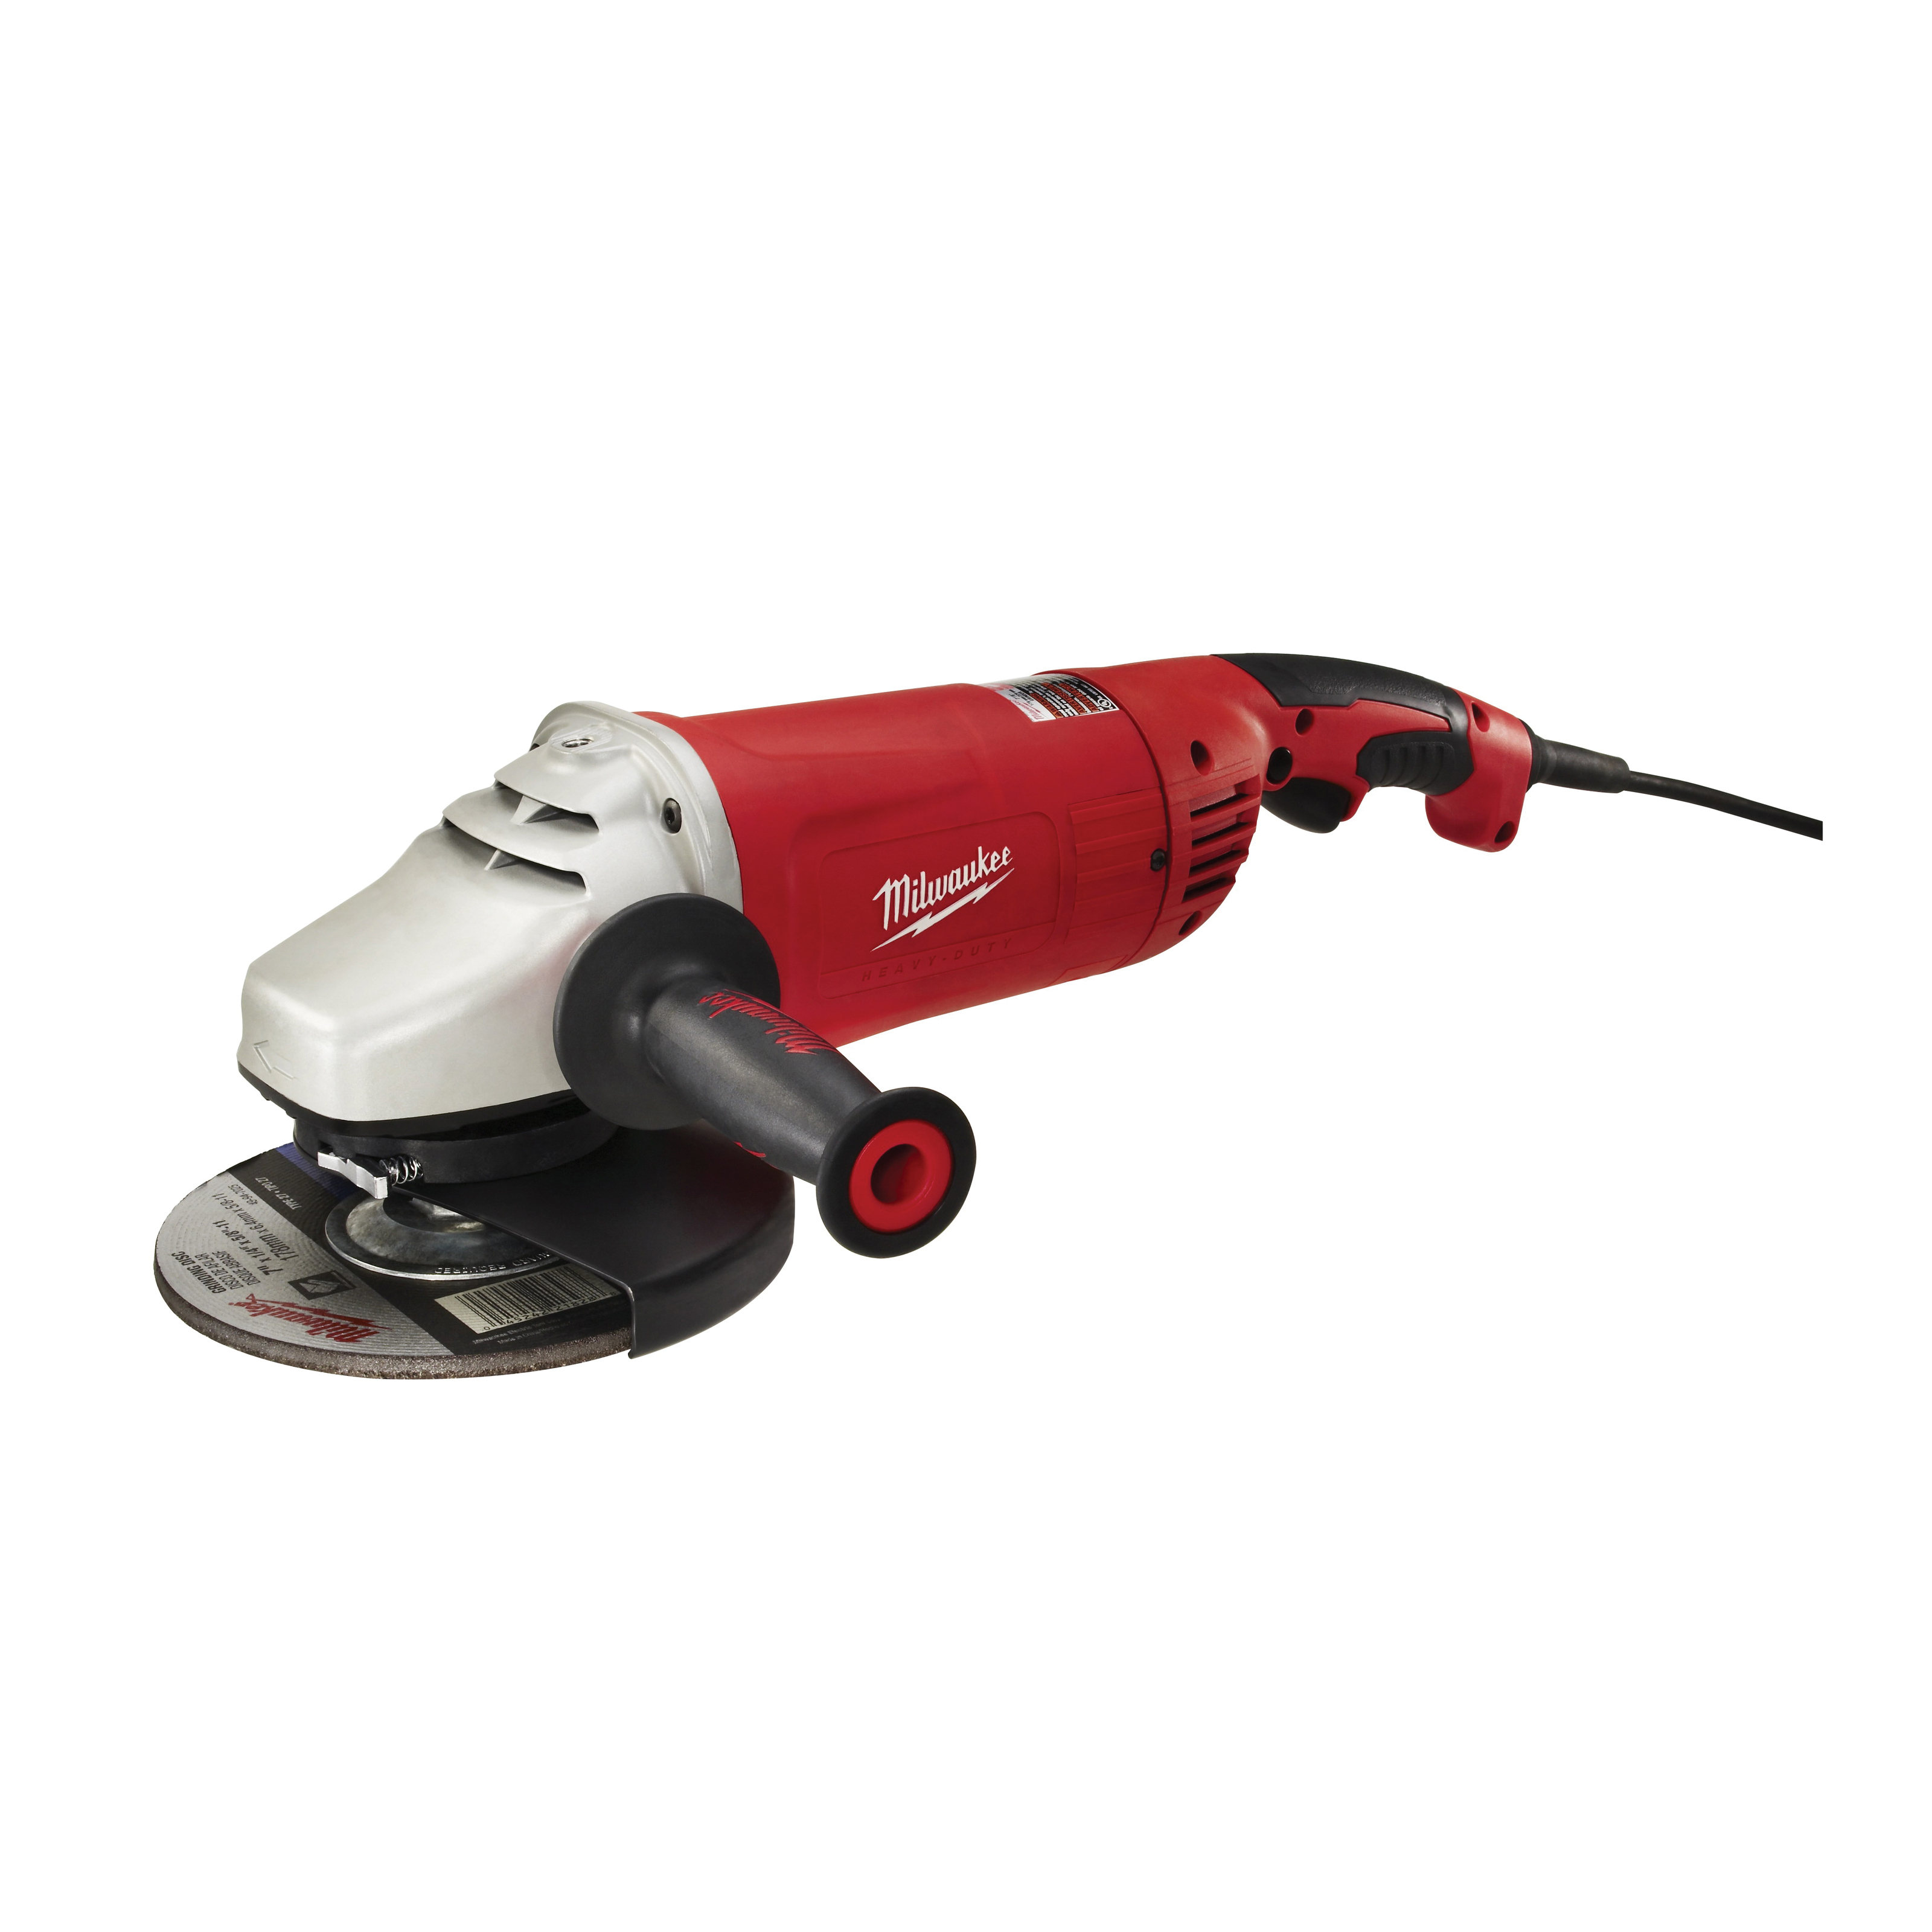 6088-30 Angle Grinder with Lock-On, 15 A, 5/8-11 Spindle, 7, 9 in Dia Wheel, 6000 rpm Speed